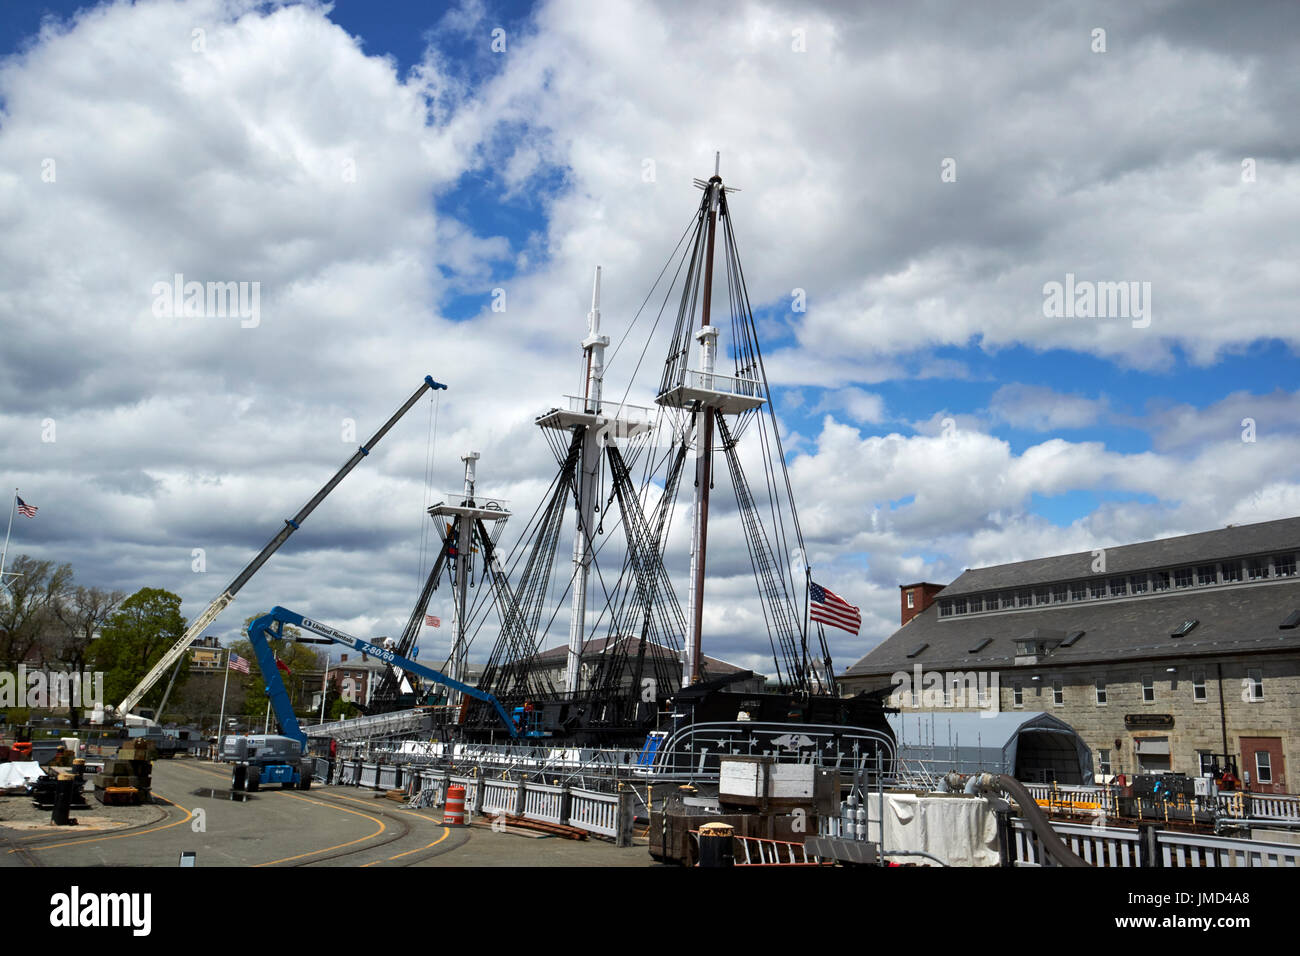 USS Constitution en cale sèche Charlestown Navy Yard Boston USA Banque D'Images